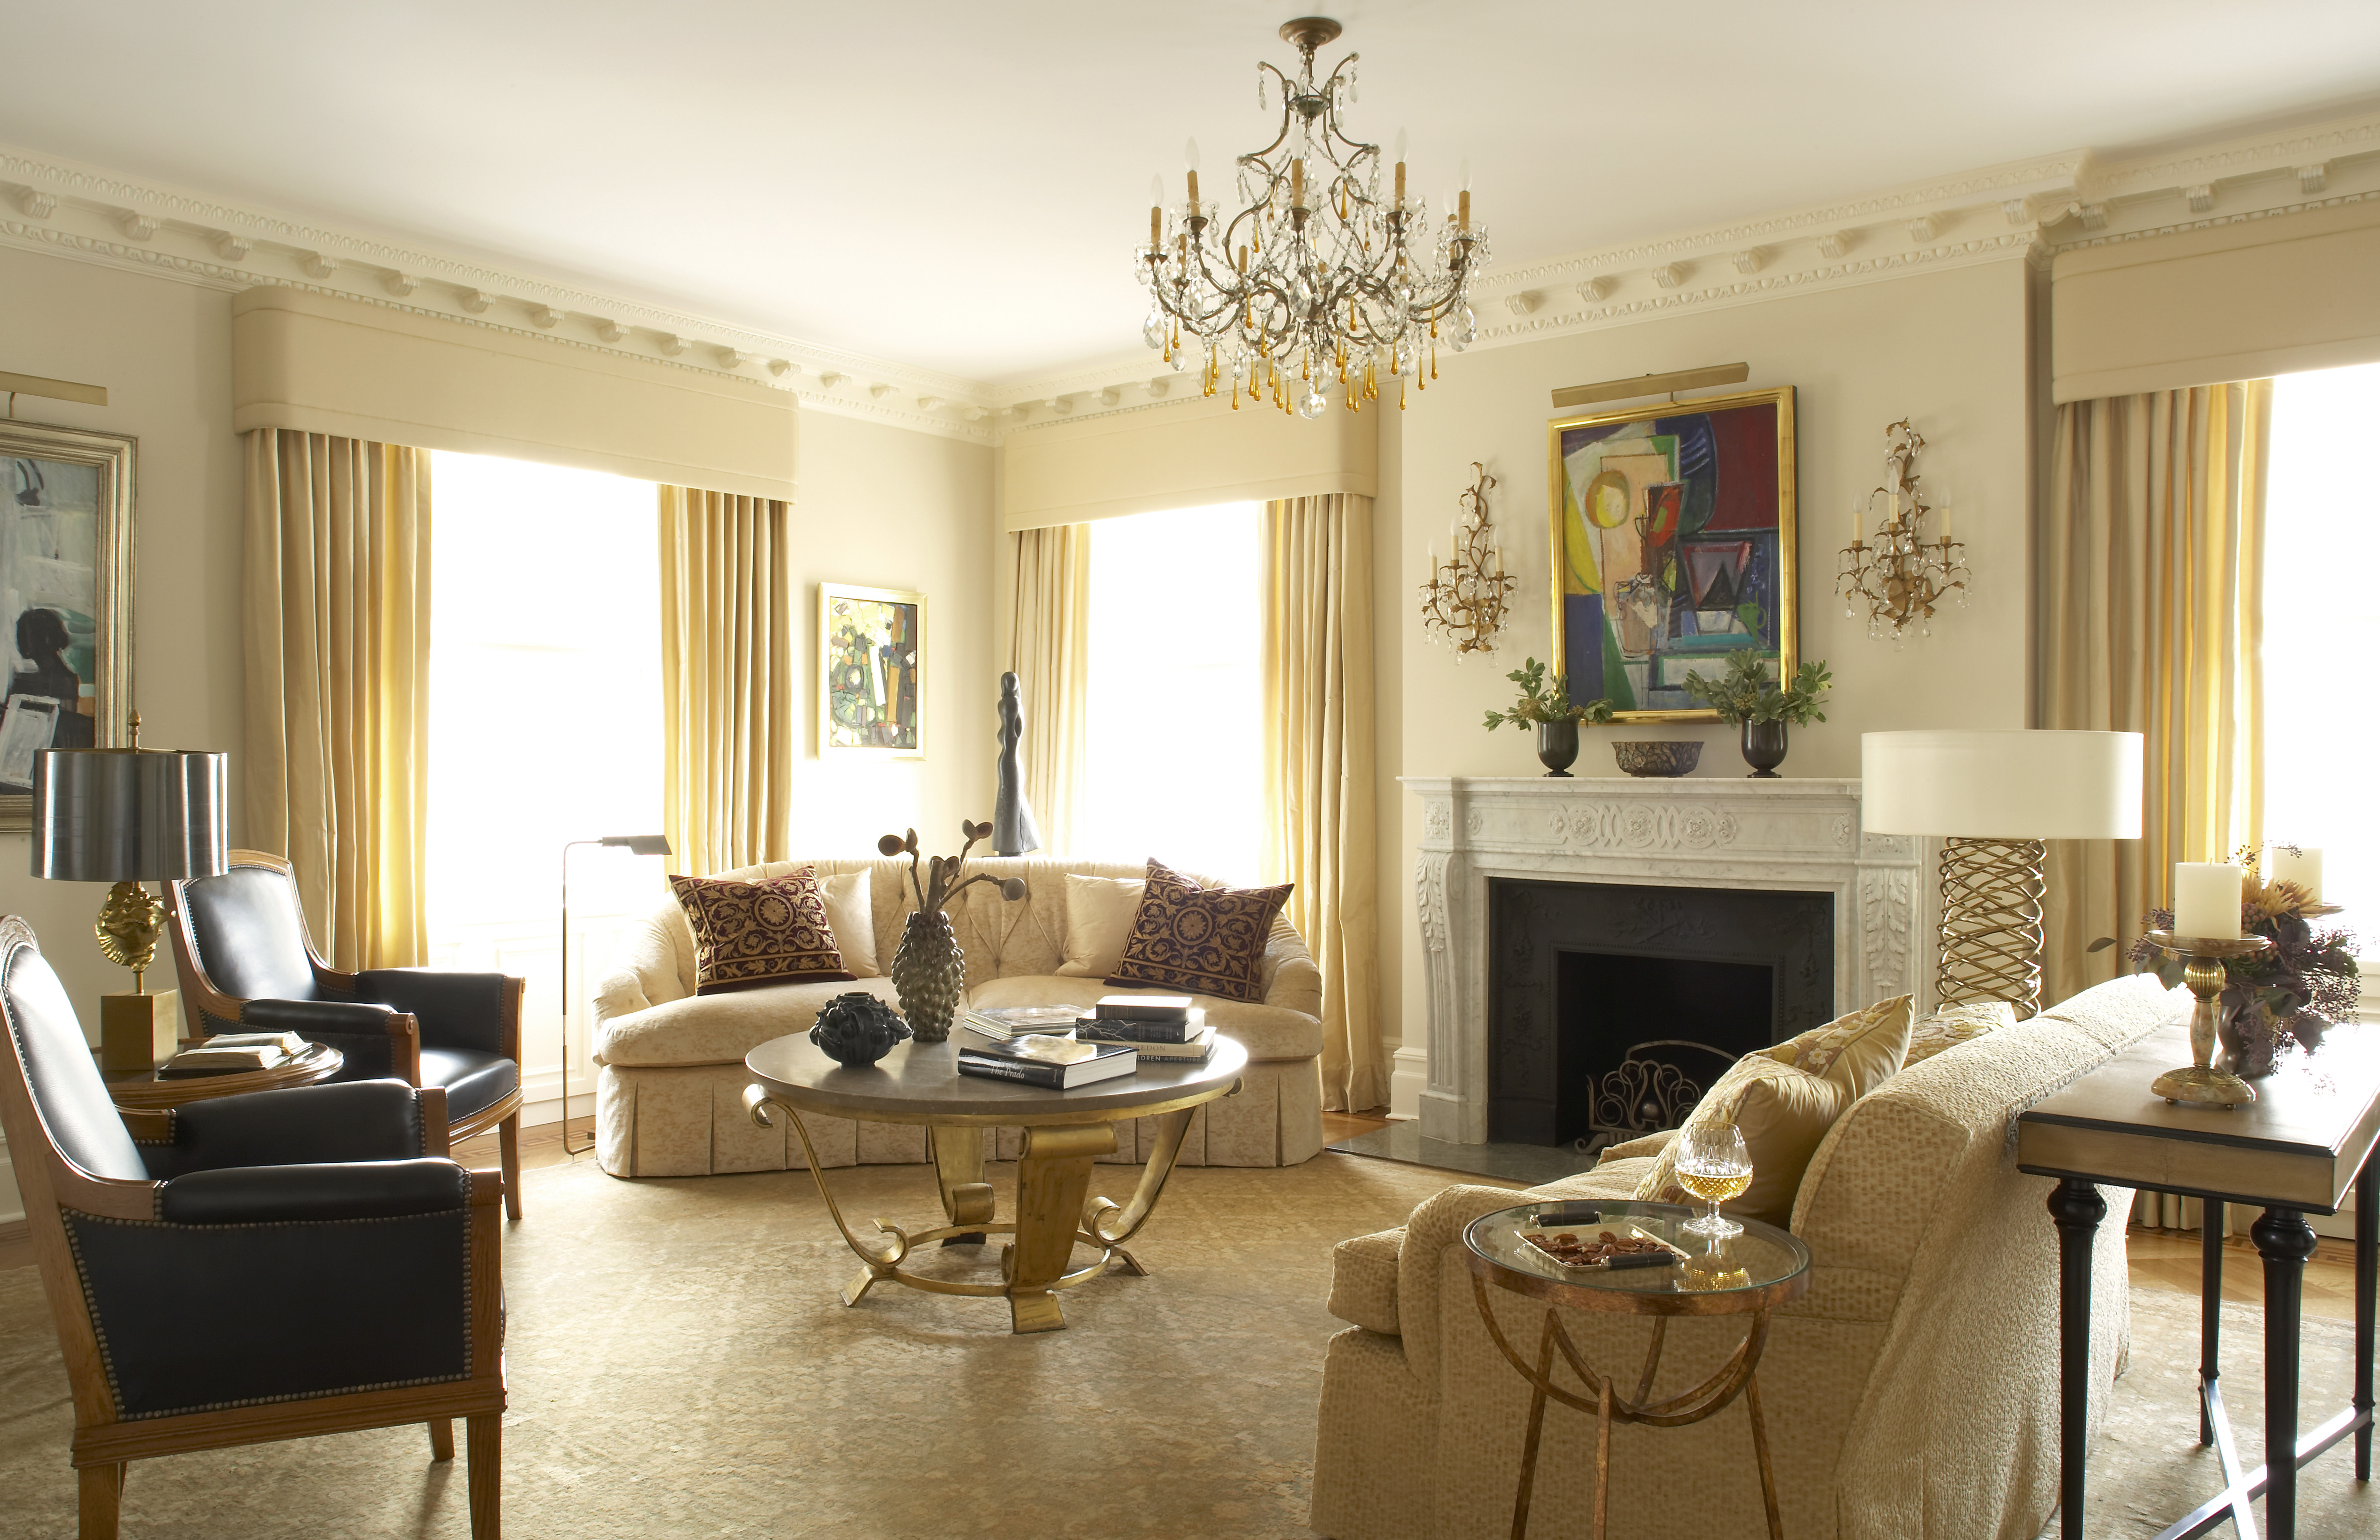  Traditional Apartment Living Room. Central Park West  by Goralnick Architecture and Deisgn.